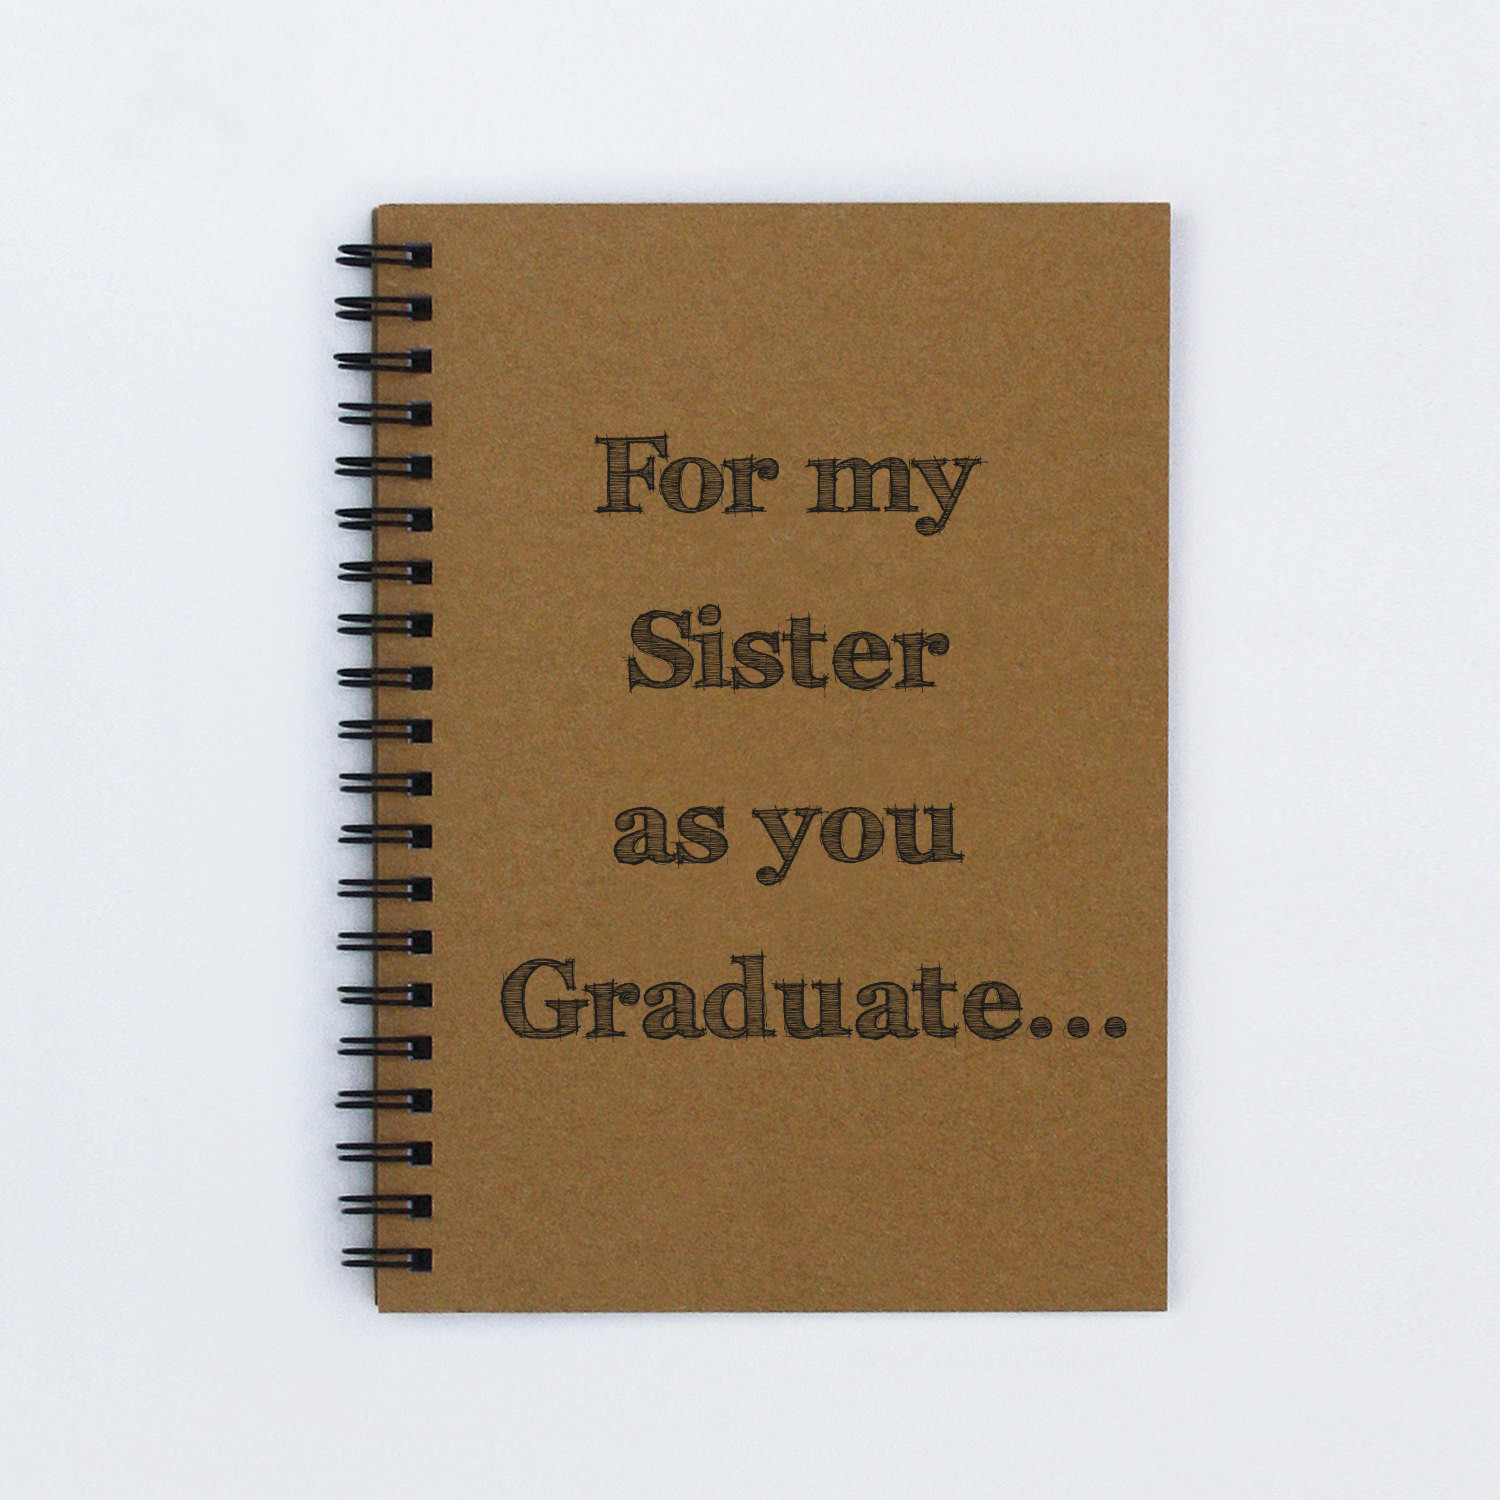 Graduation Gift Ideas For Sister
 Graduation t for sister For my Sister by